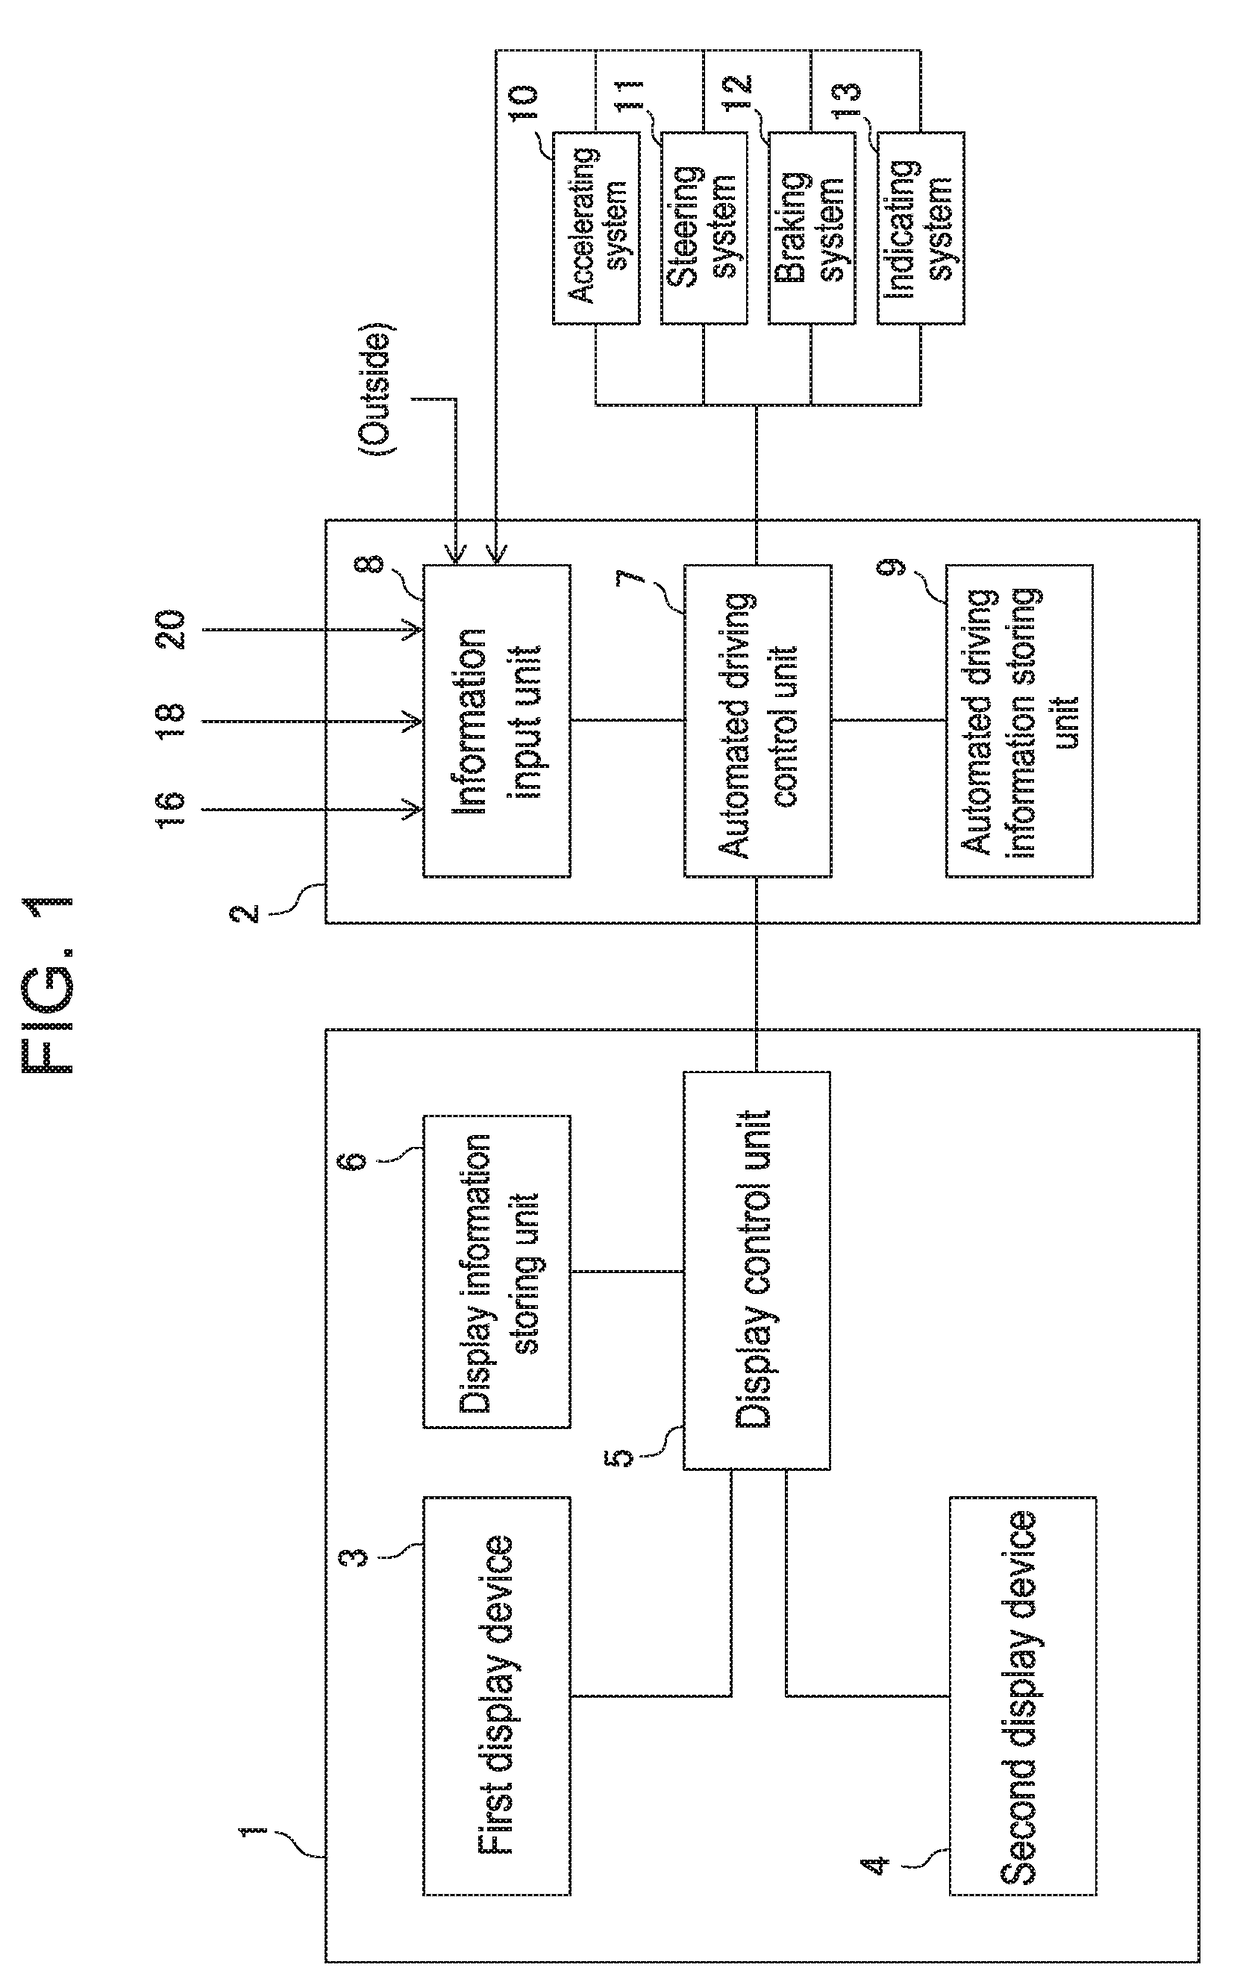 Vehicle image display system and method